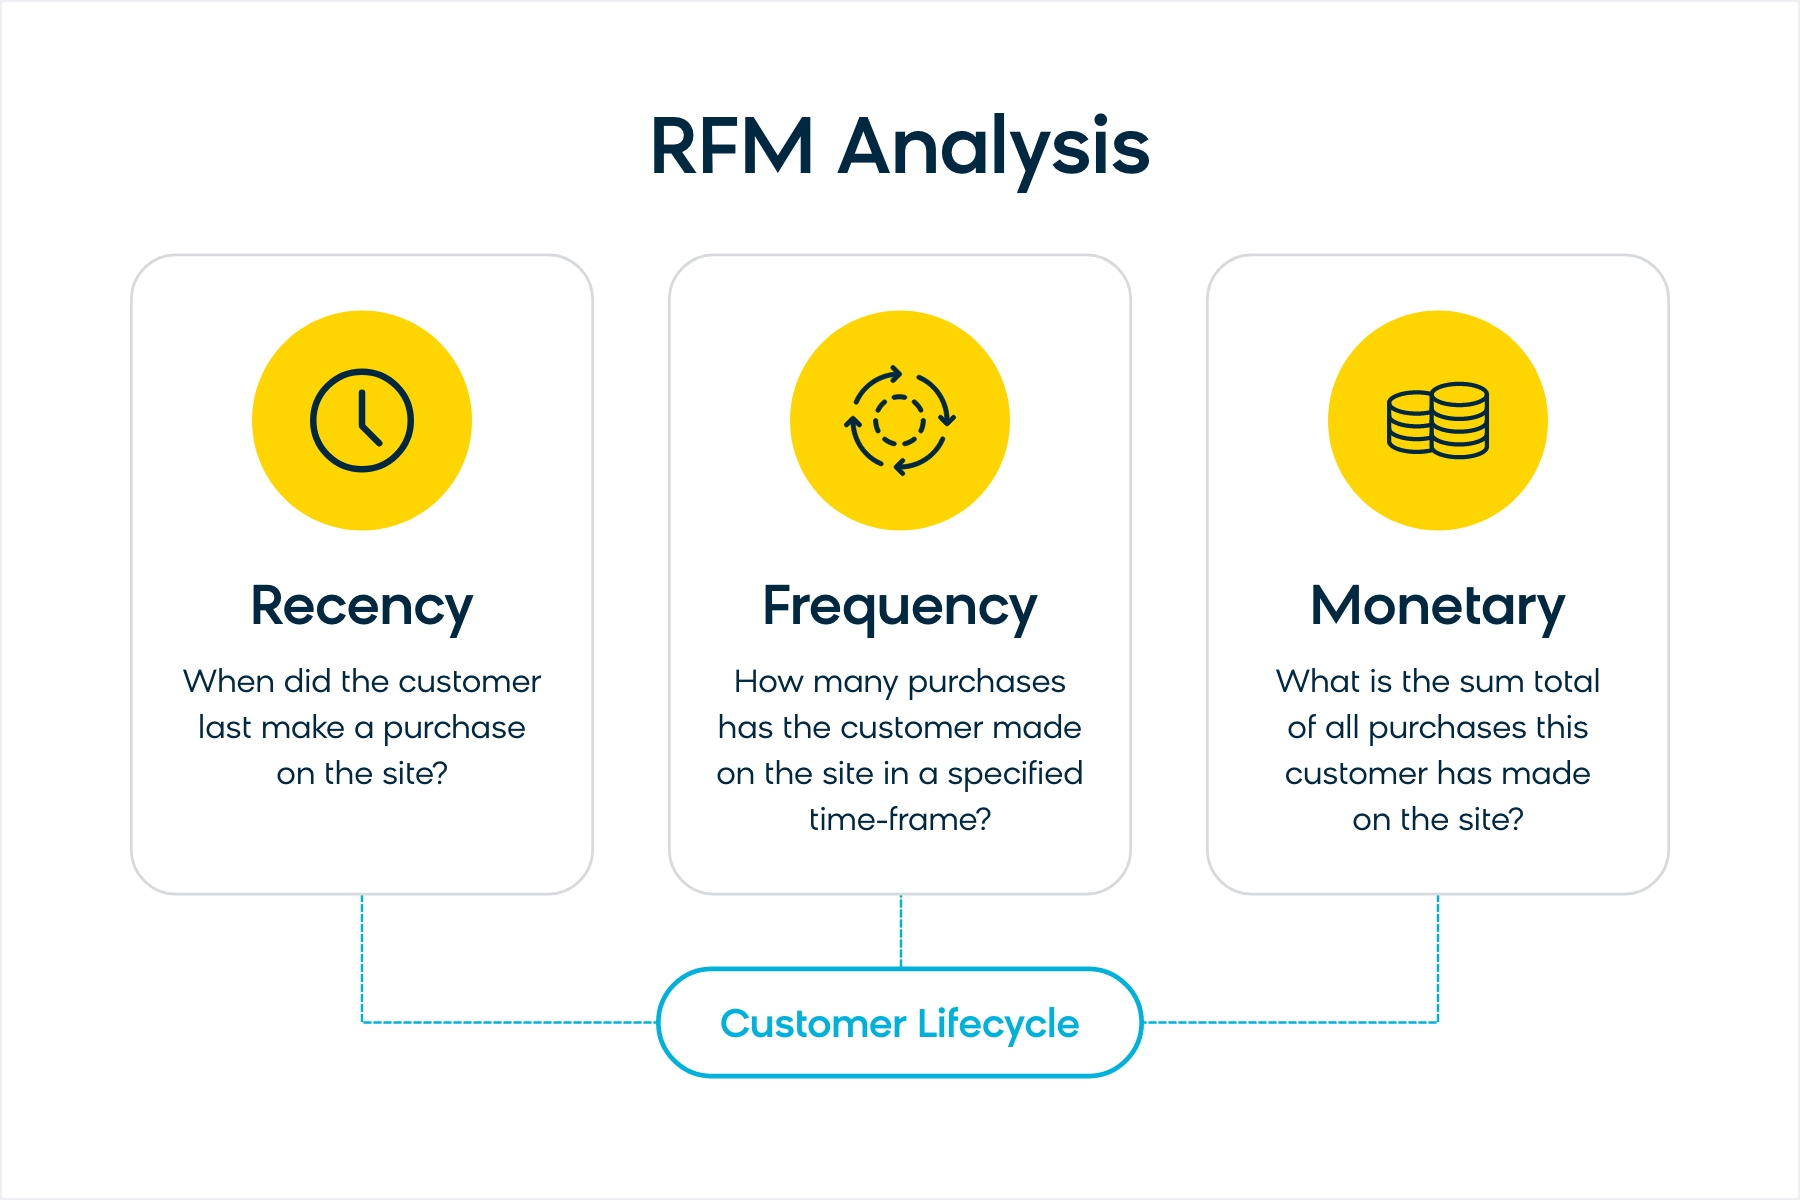 An illustrated breakdown of RFM analysis of the customer lifecycle.